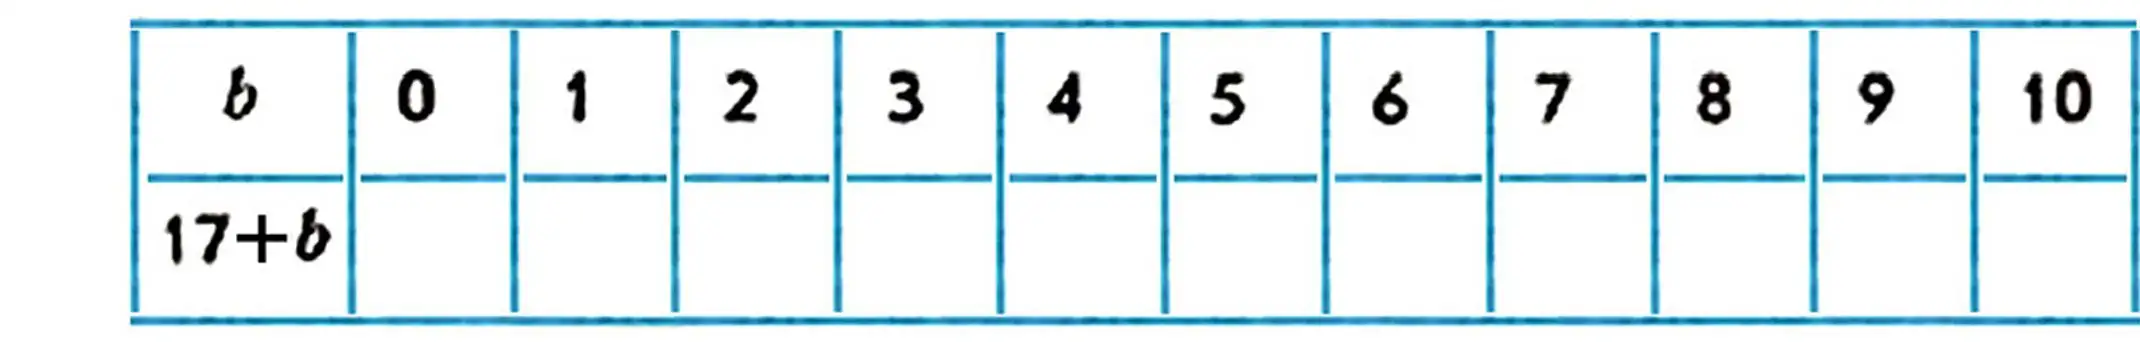 Table of adding numbers